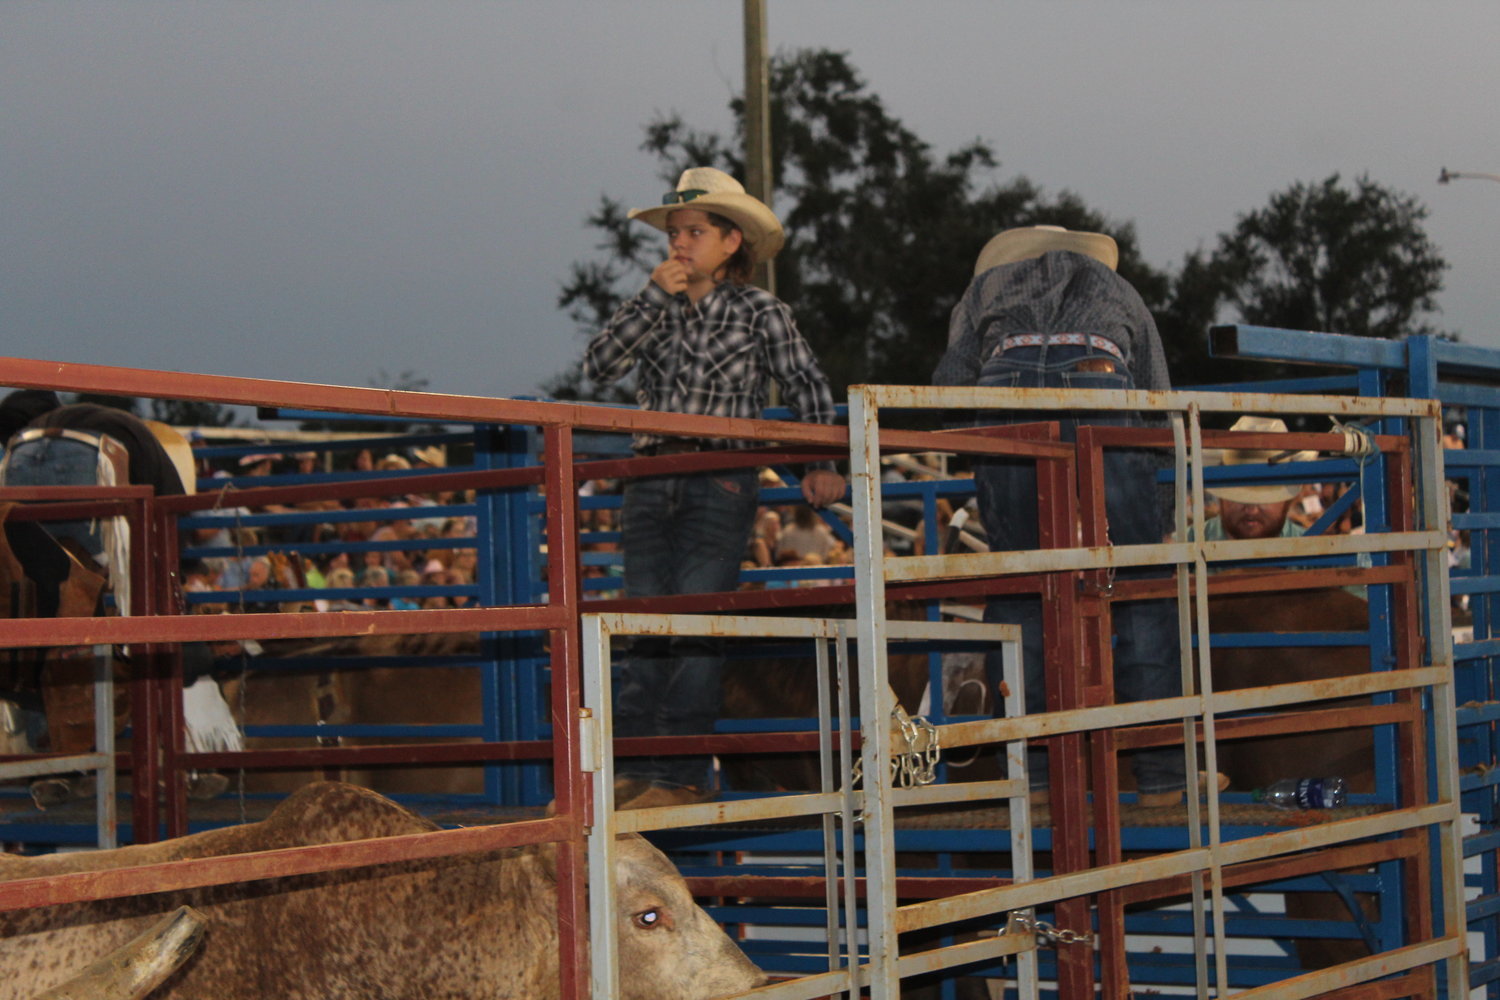 Rodeo athletes will compete in various events to determine winners at the 24th annual Jennifer Claire Moore Foundation Professional Rodeo starting Thursday, Aug. 4.